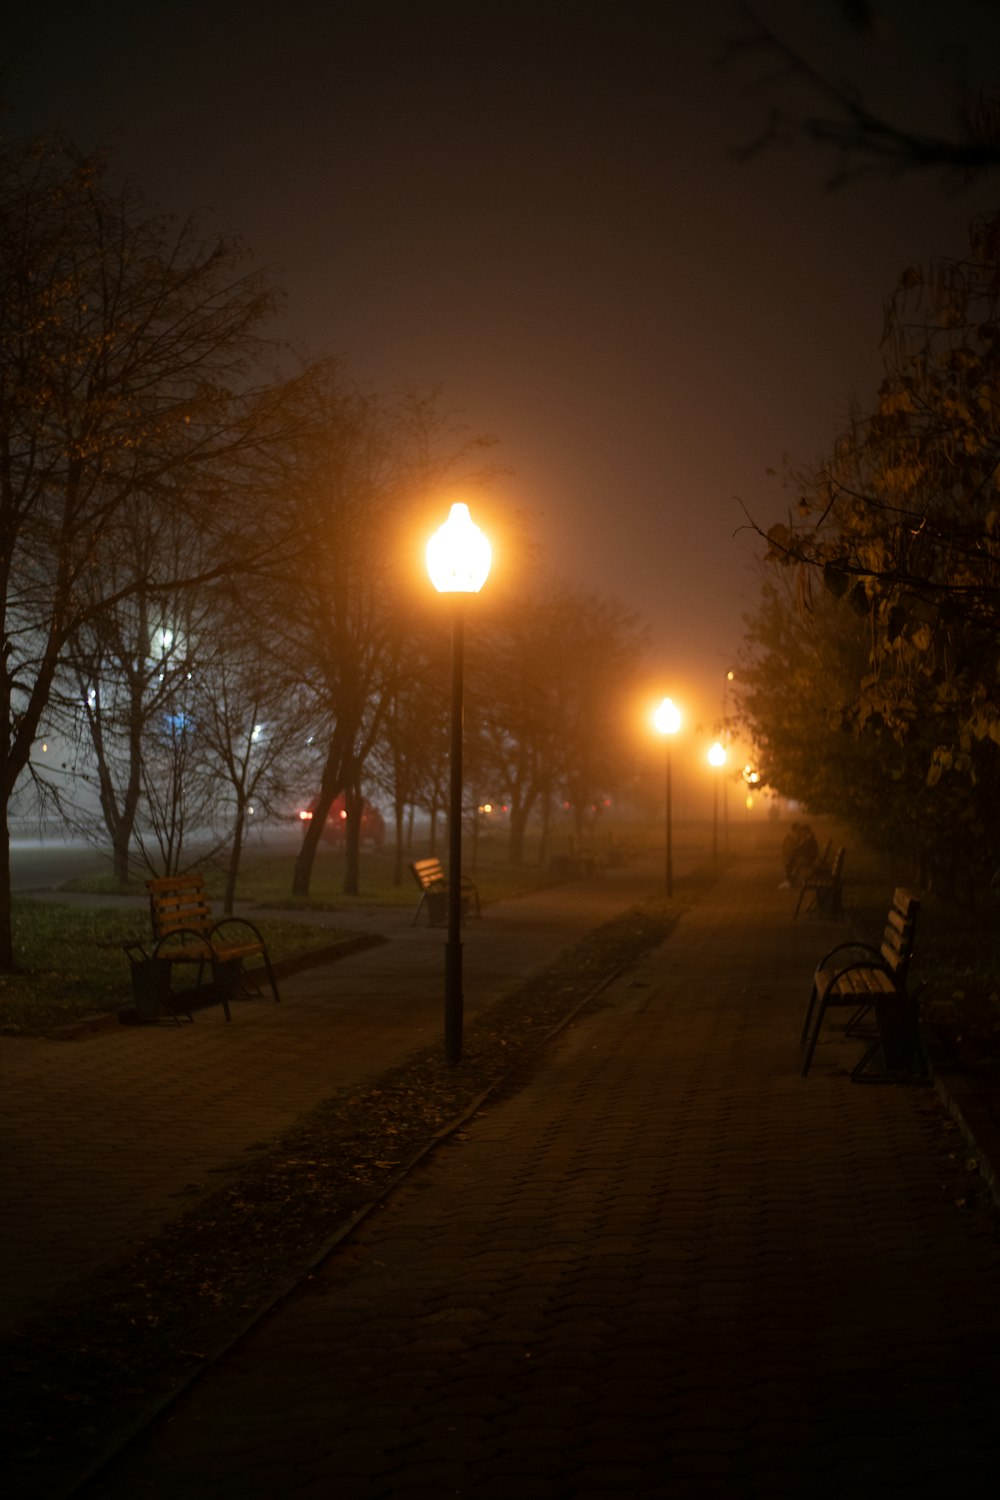 a park bench sitting on the side of a road at night